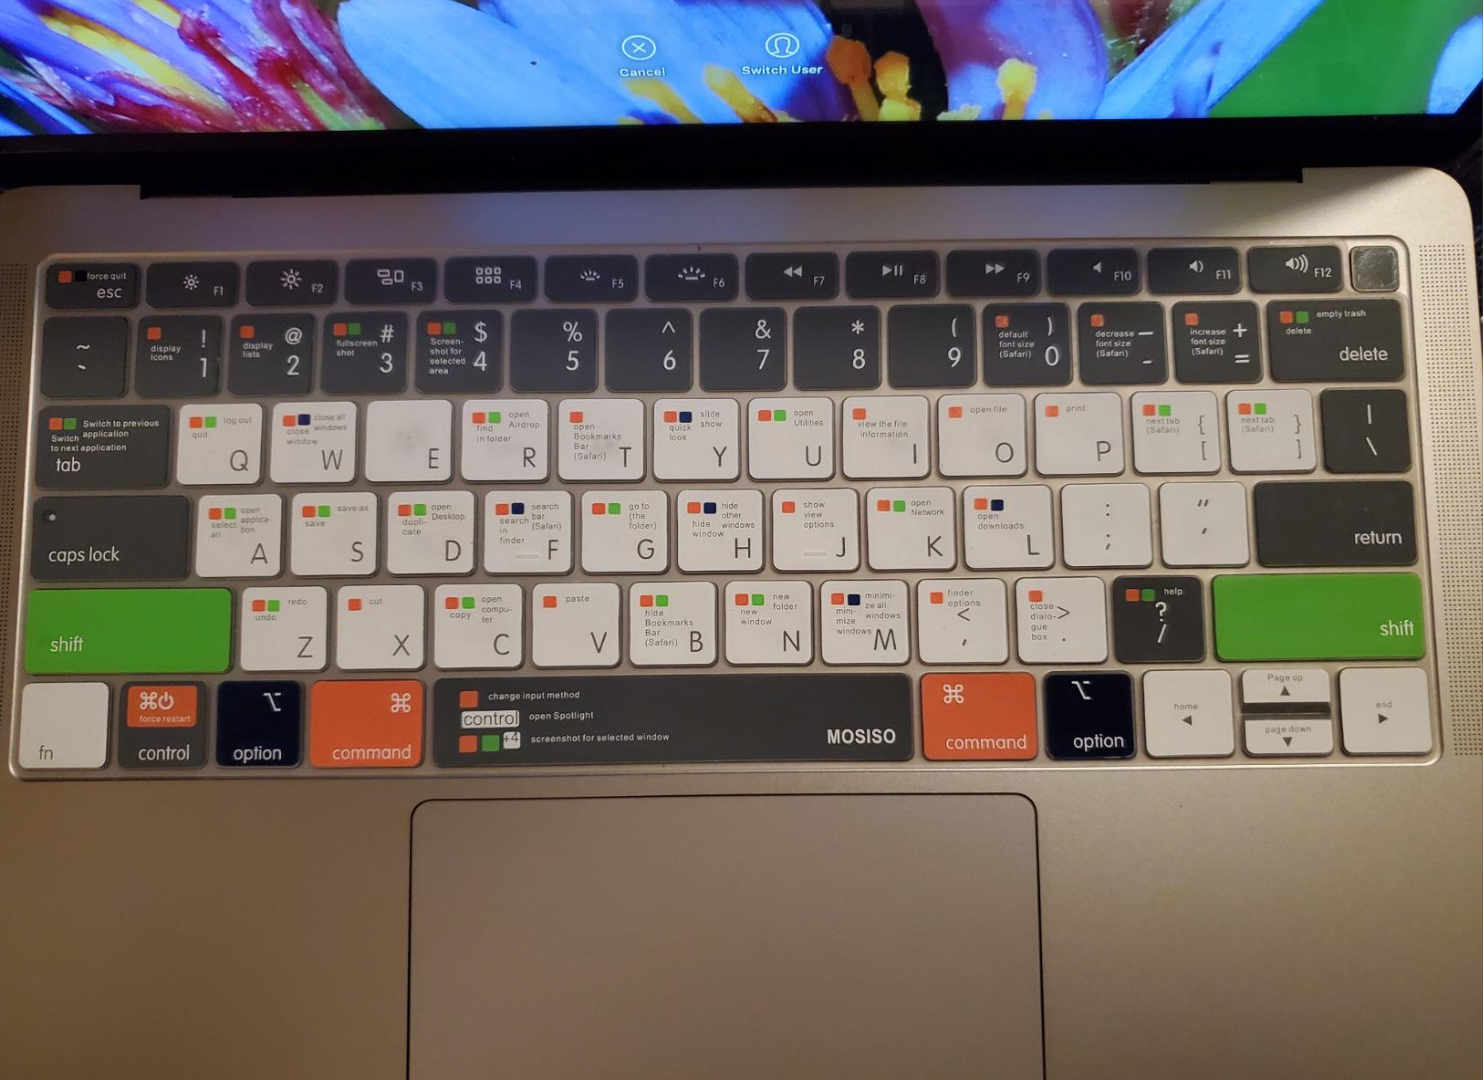 The silicone keyboard cover in white, black, green, and orange displaying shortcut information in small typing on the keys 